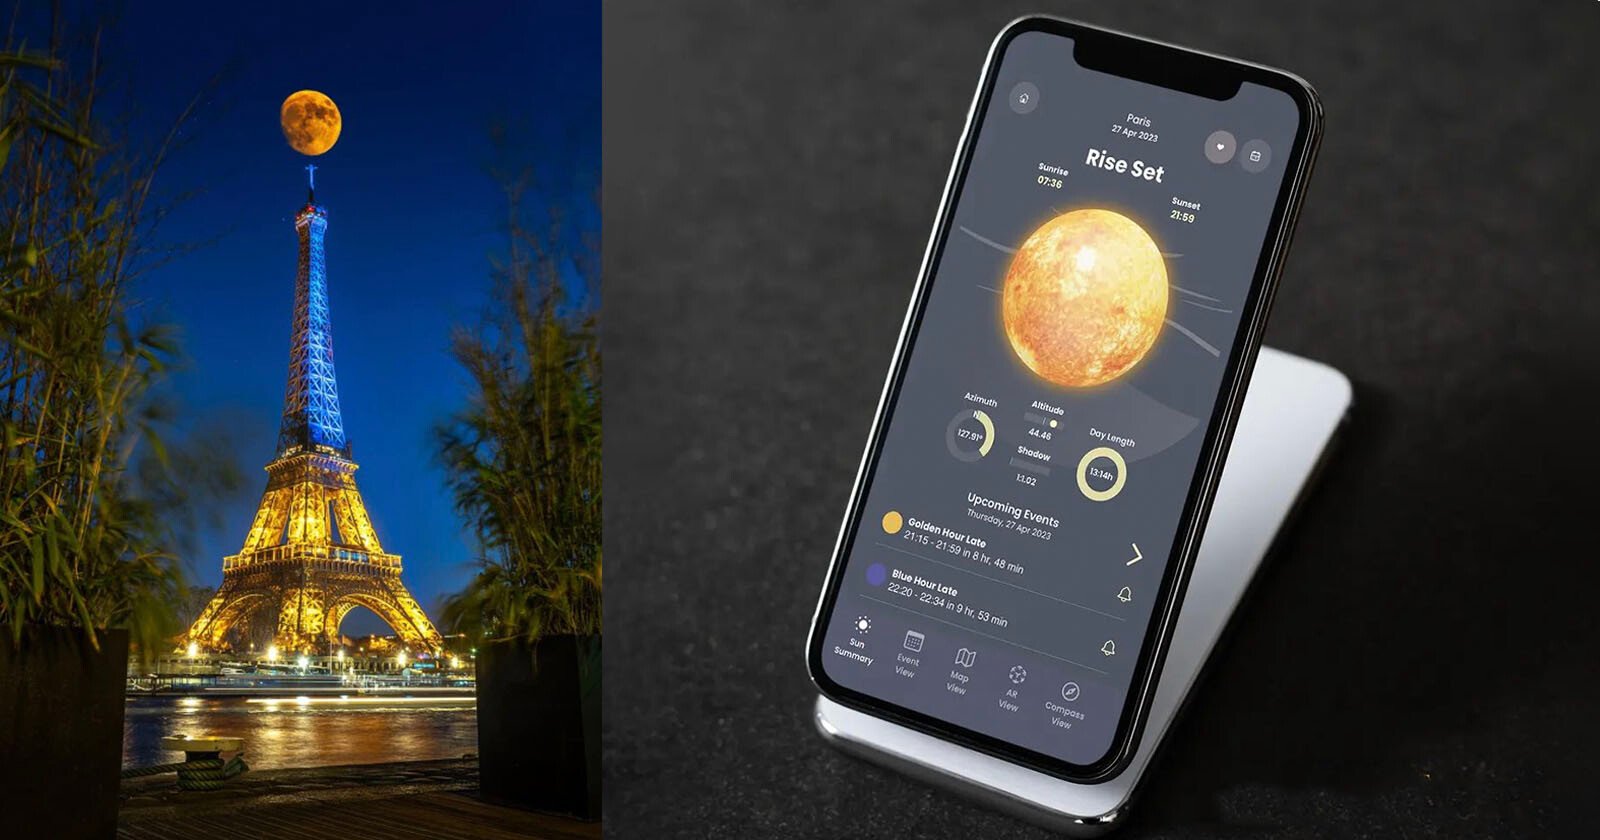 The Sun Moon Expert App Tracks the Moon and Sun for Photo Opportunities